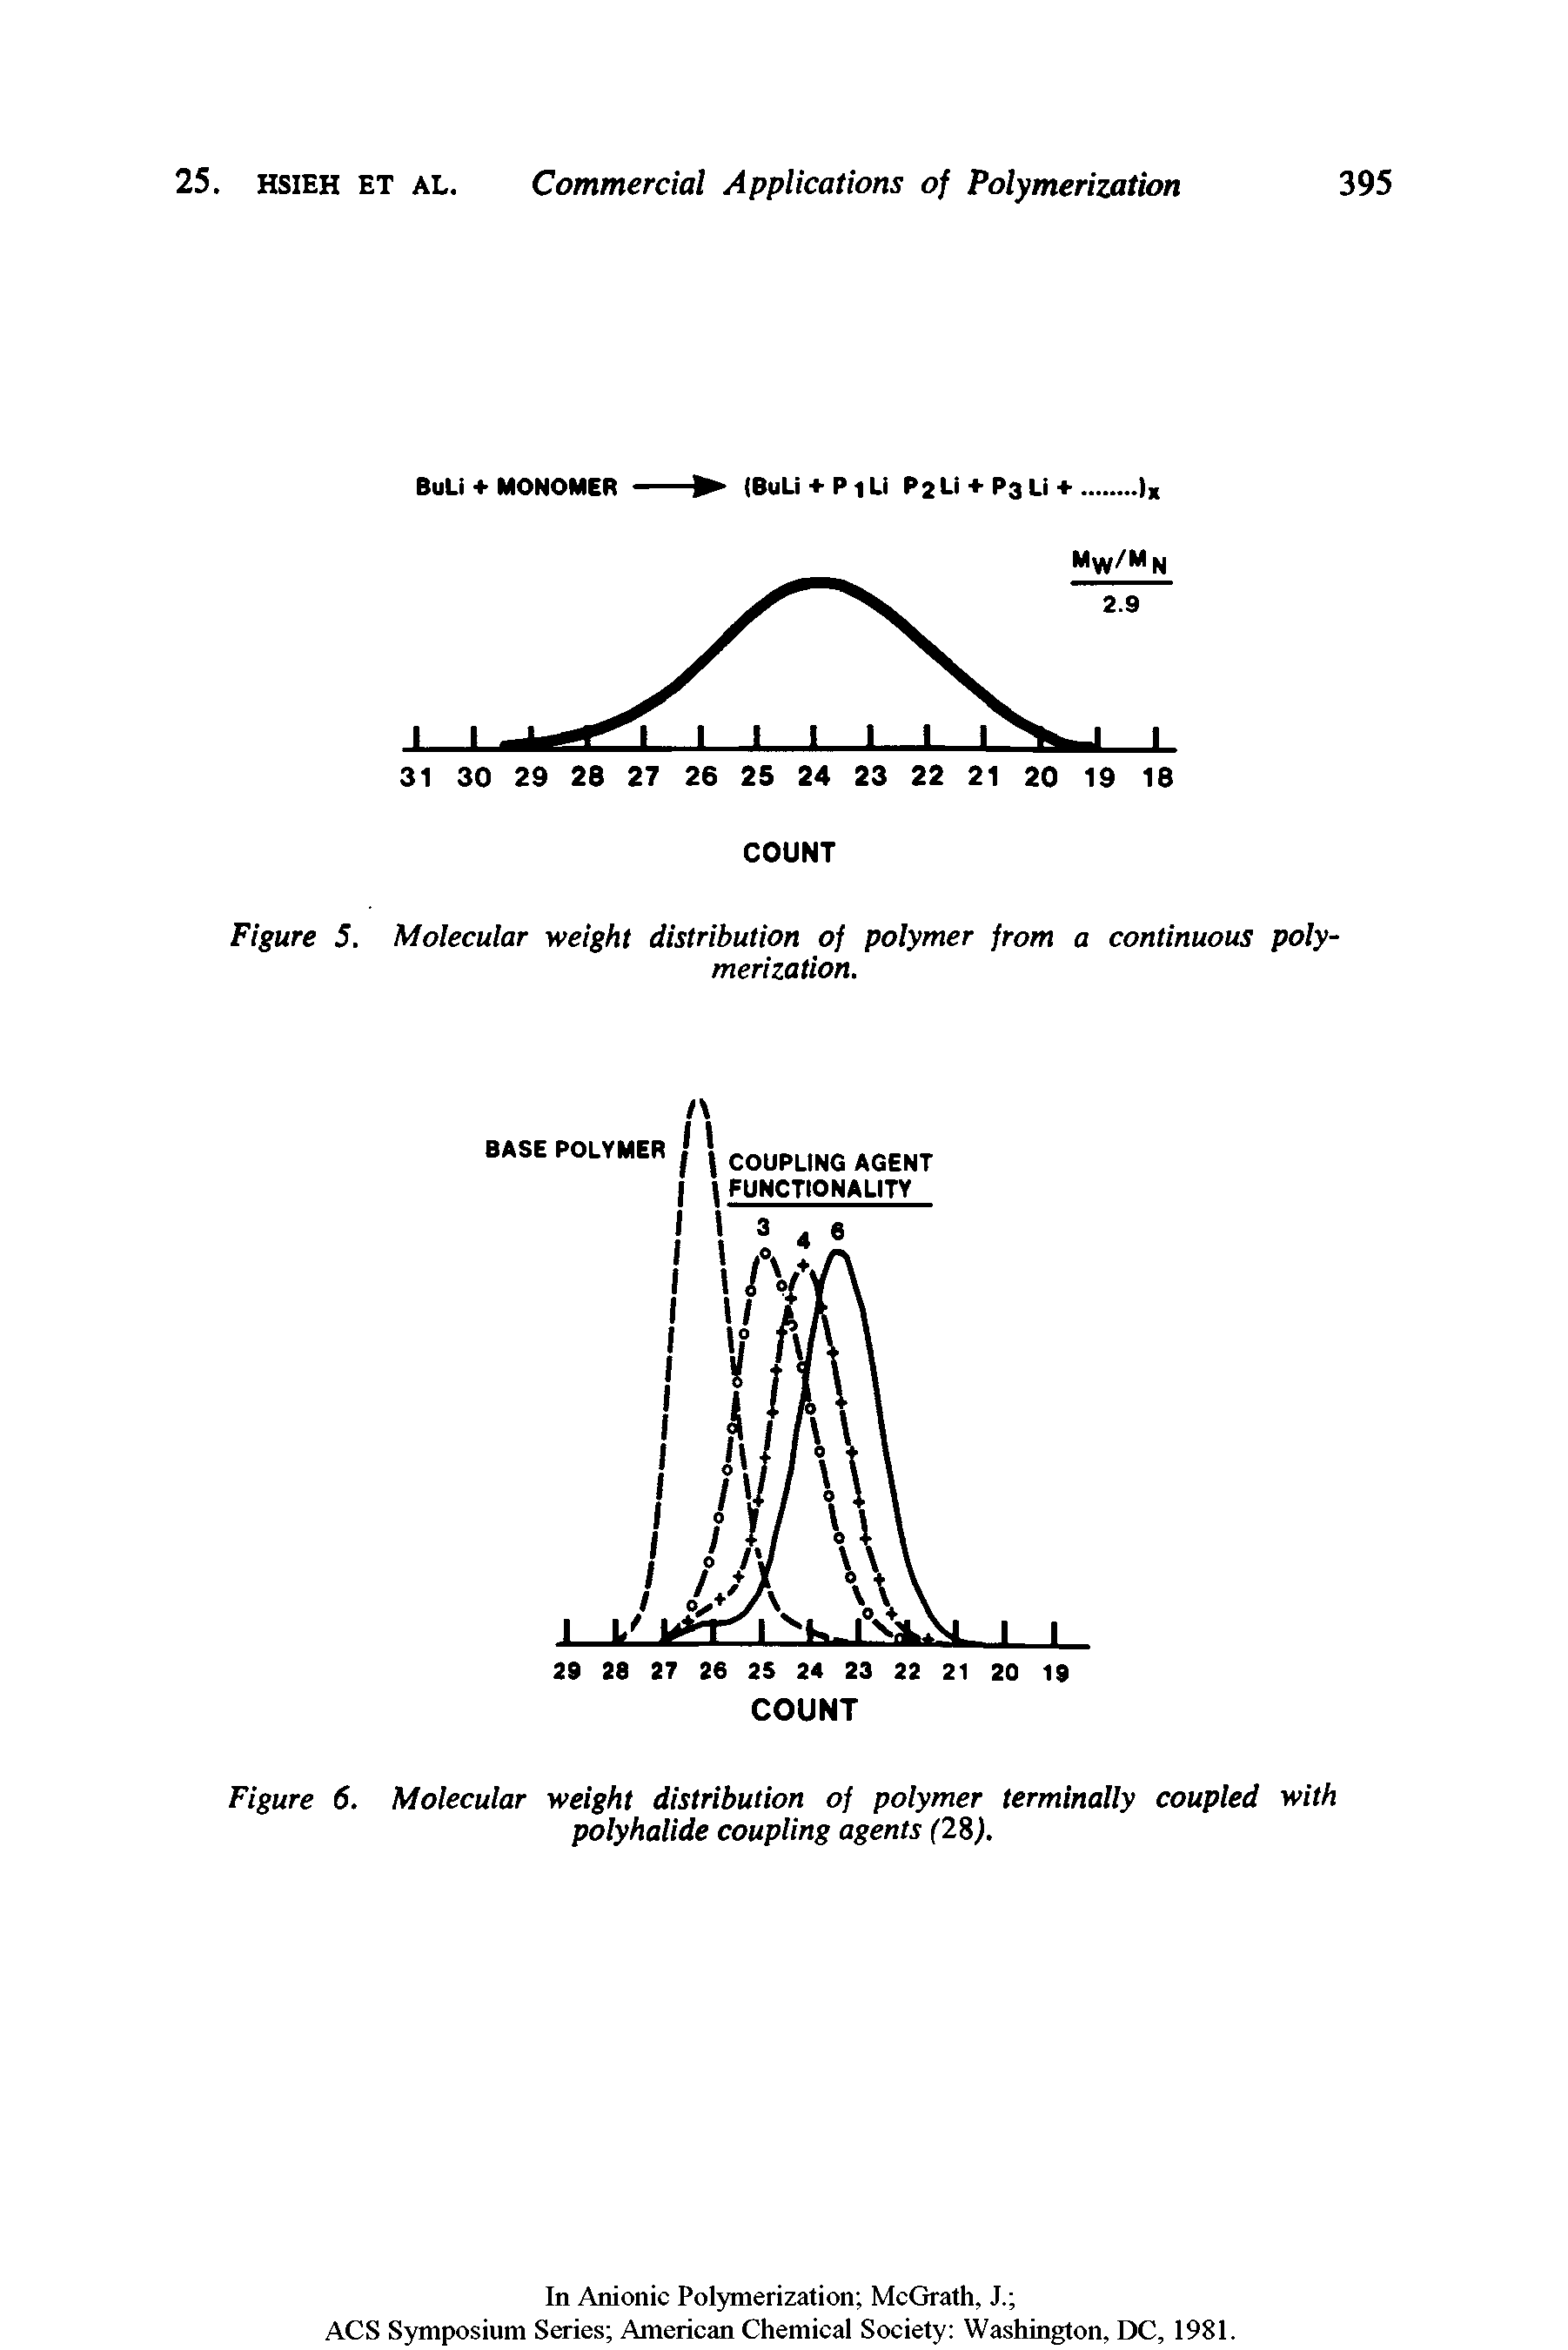 Figure 6. Molecular weight distribution of polymer terminally coupled with polyhalide coupling agents (2%).